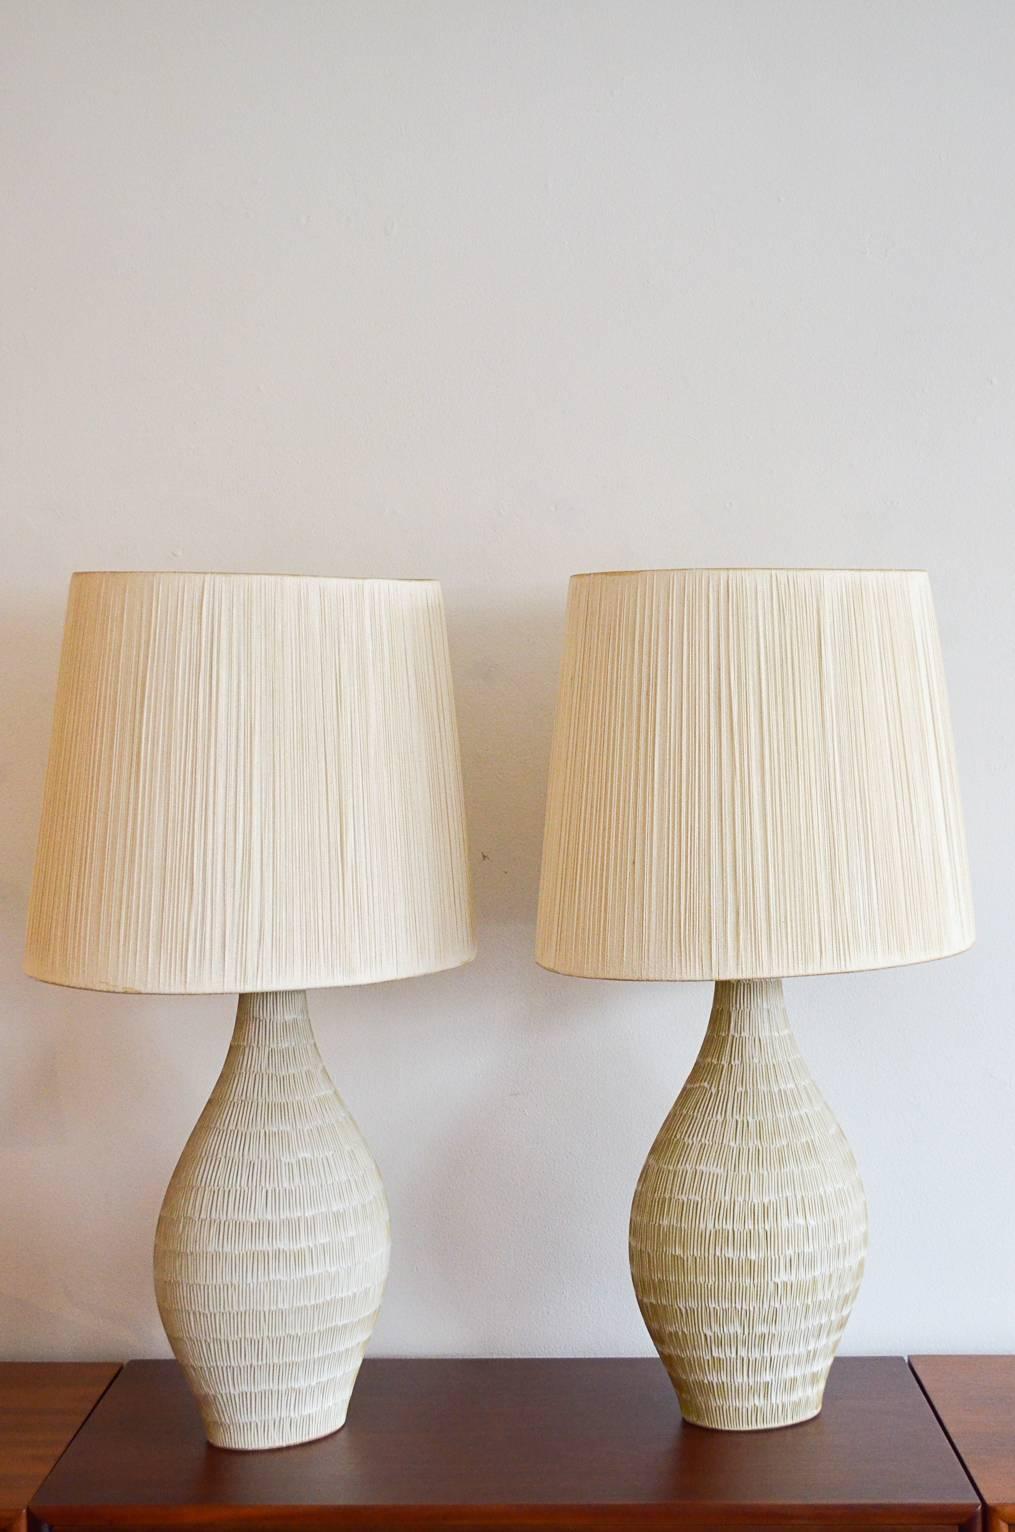 Elegant pair of large cream or ivory ceramic lamps with incised pattern. Beautiful shape, original oval string shades in excellent vintage condition. Original wiring. Lamps measure 20